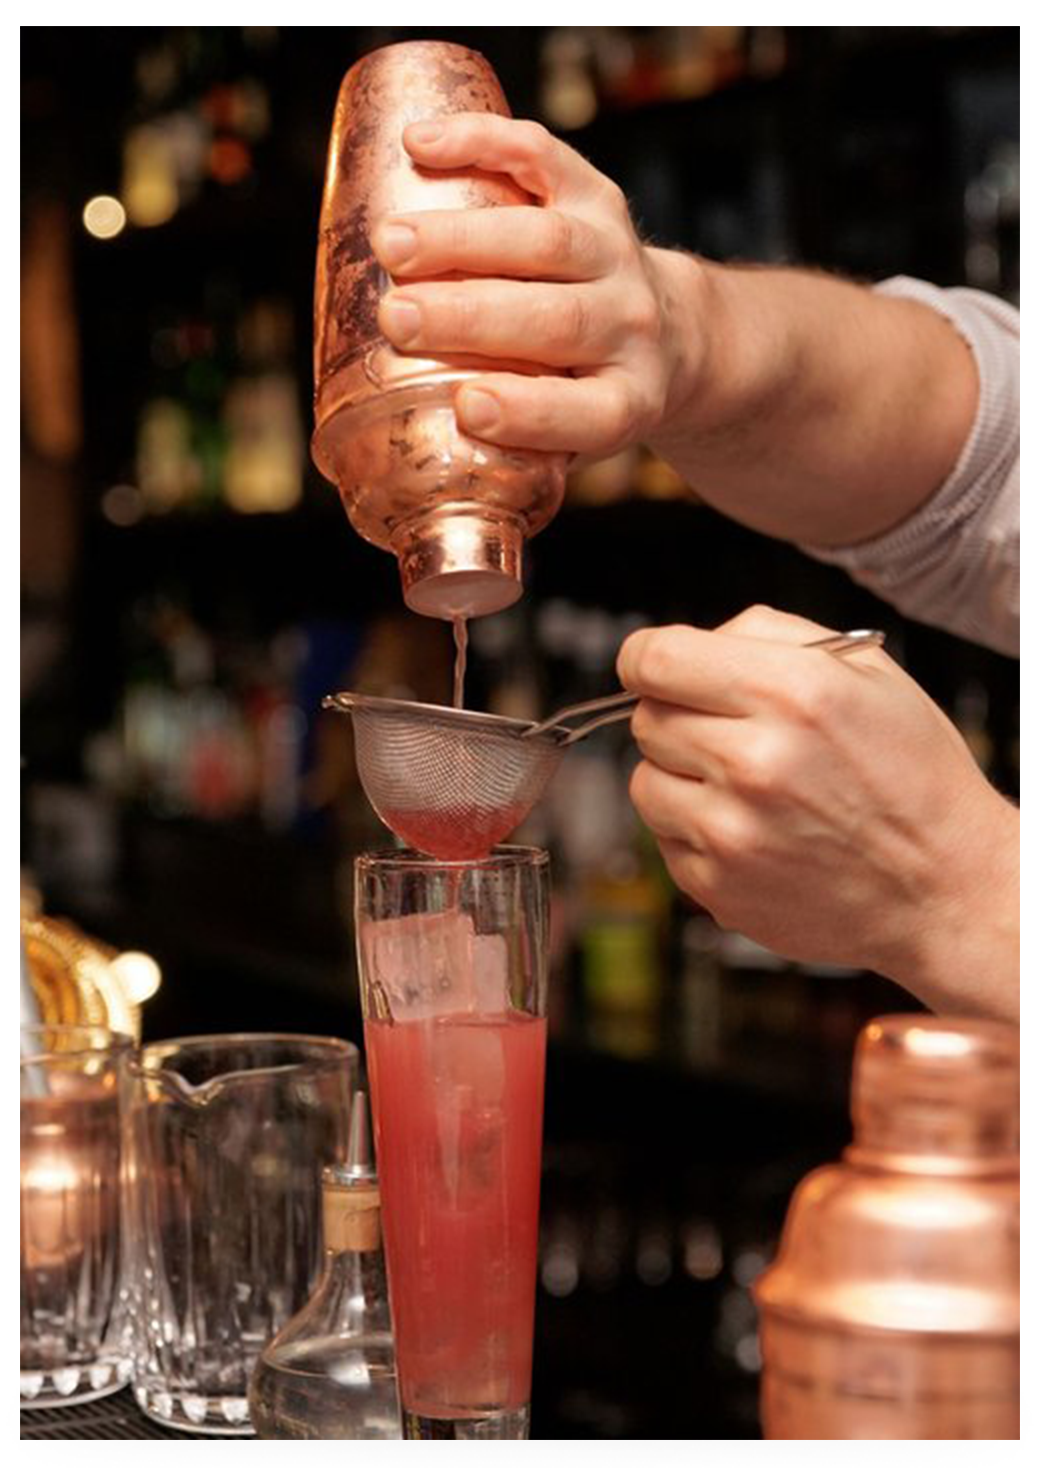 Bartender pouring mixed drink